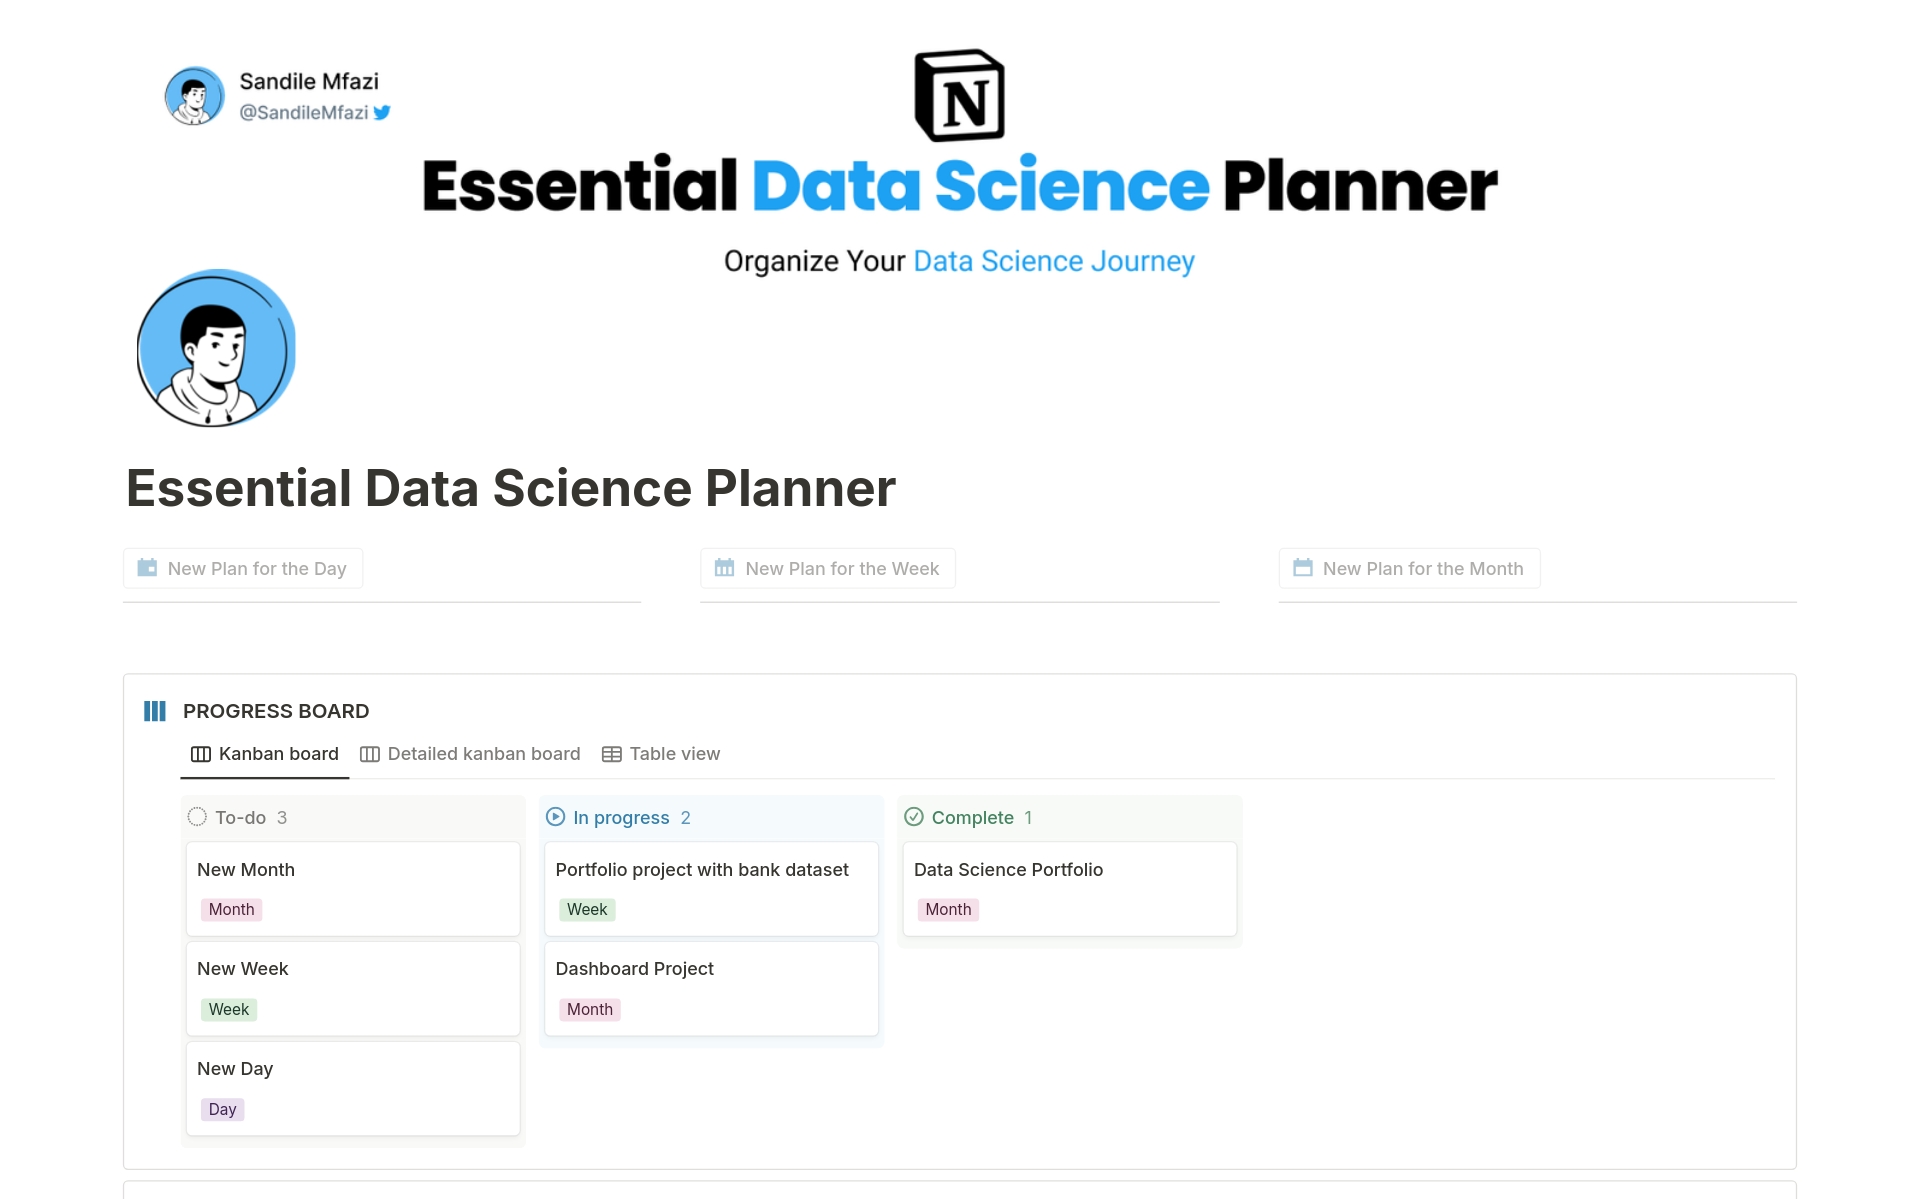 Plan for your Data Science Journey

Start planning your Data Science Journey, manage your tasks and manage resources.